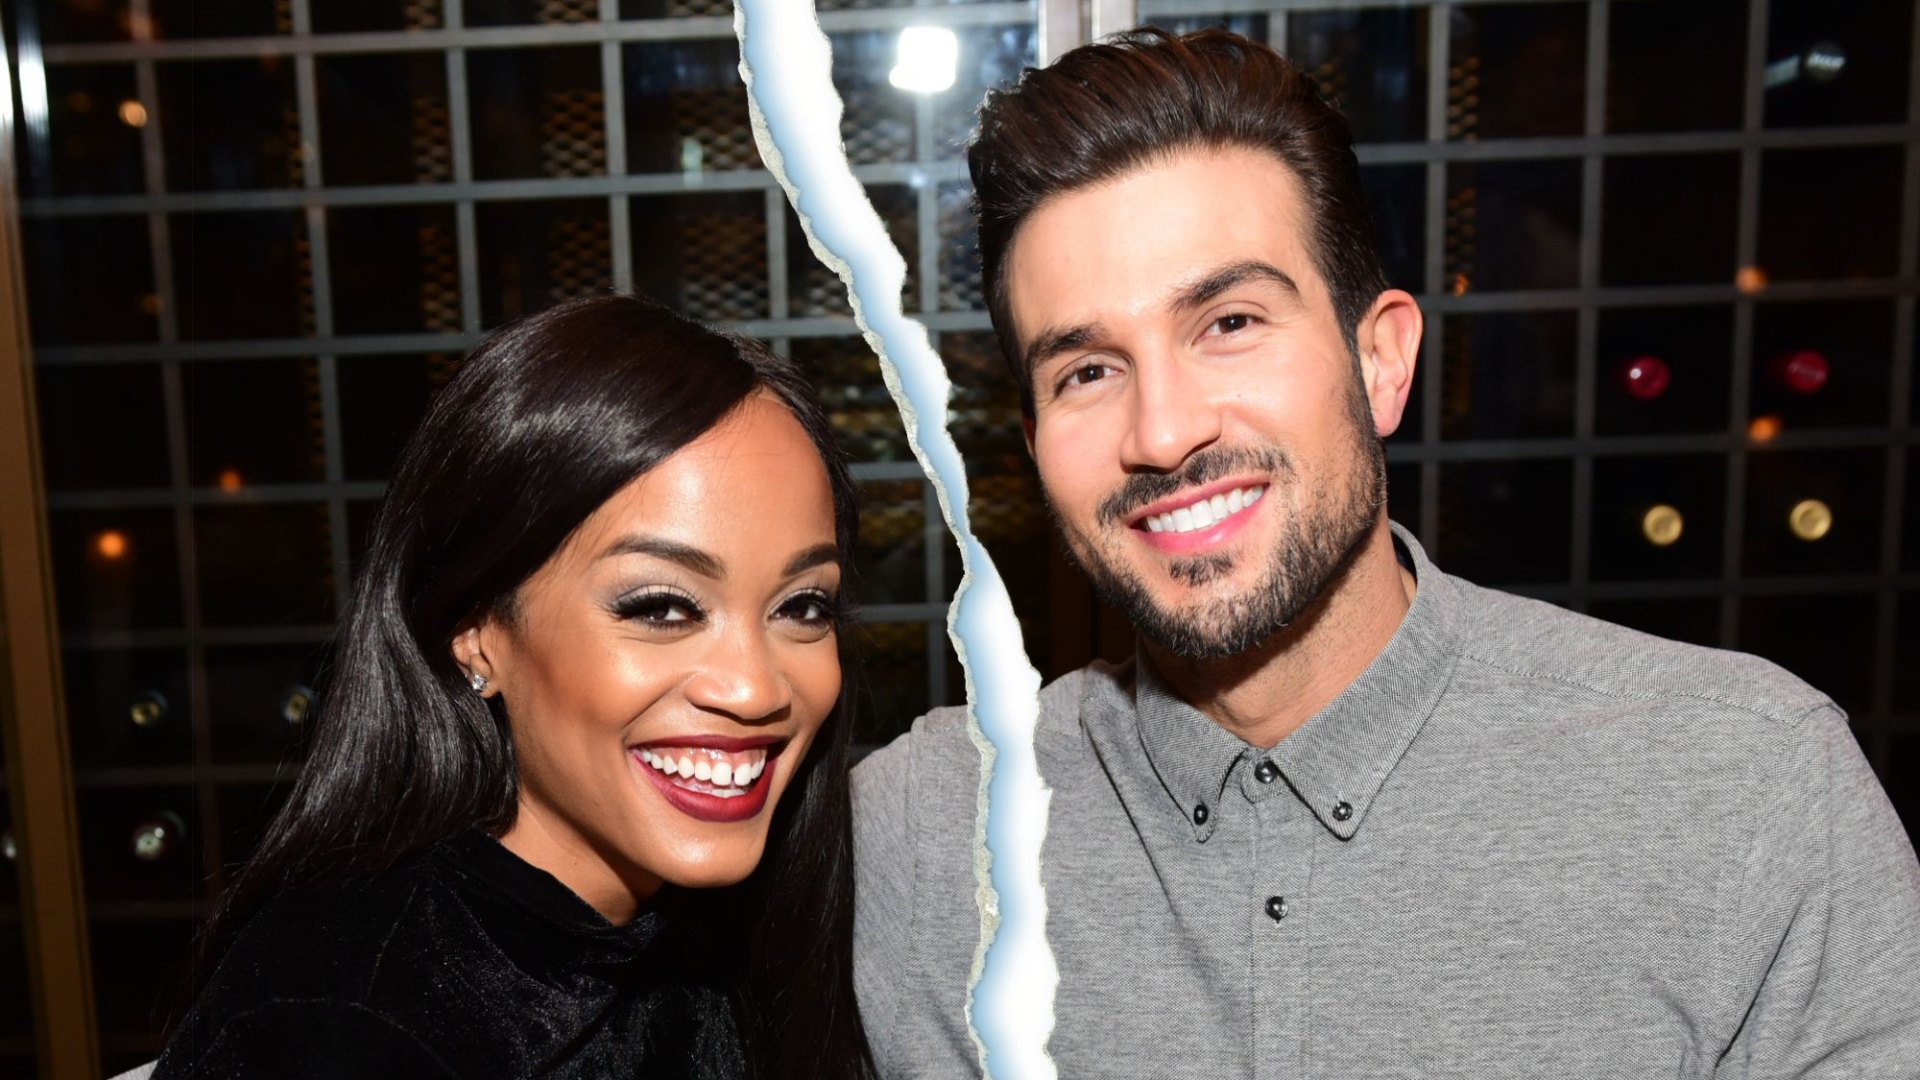 The Bachelorette’s Bryan Abasolo and Rachel Lindsay Divorce In Touch